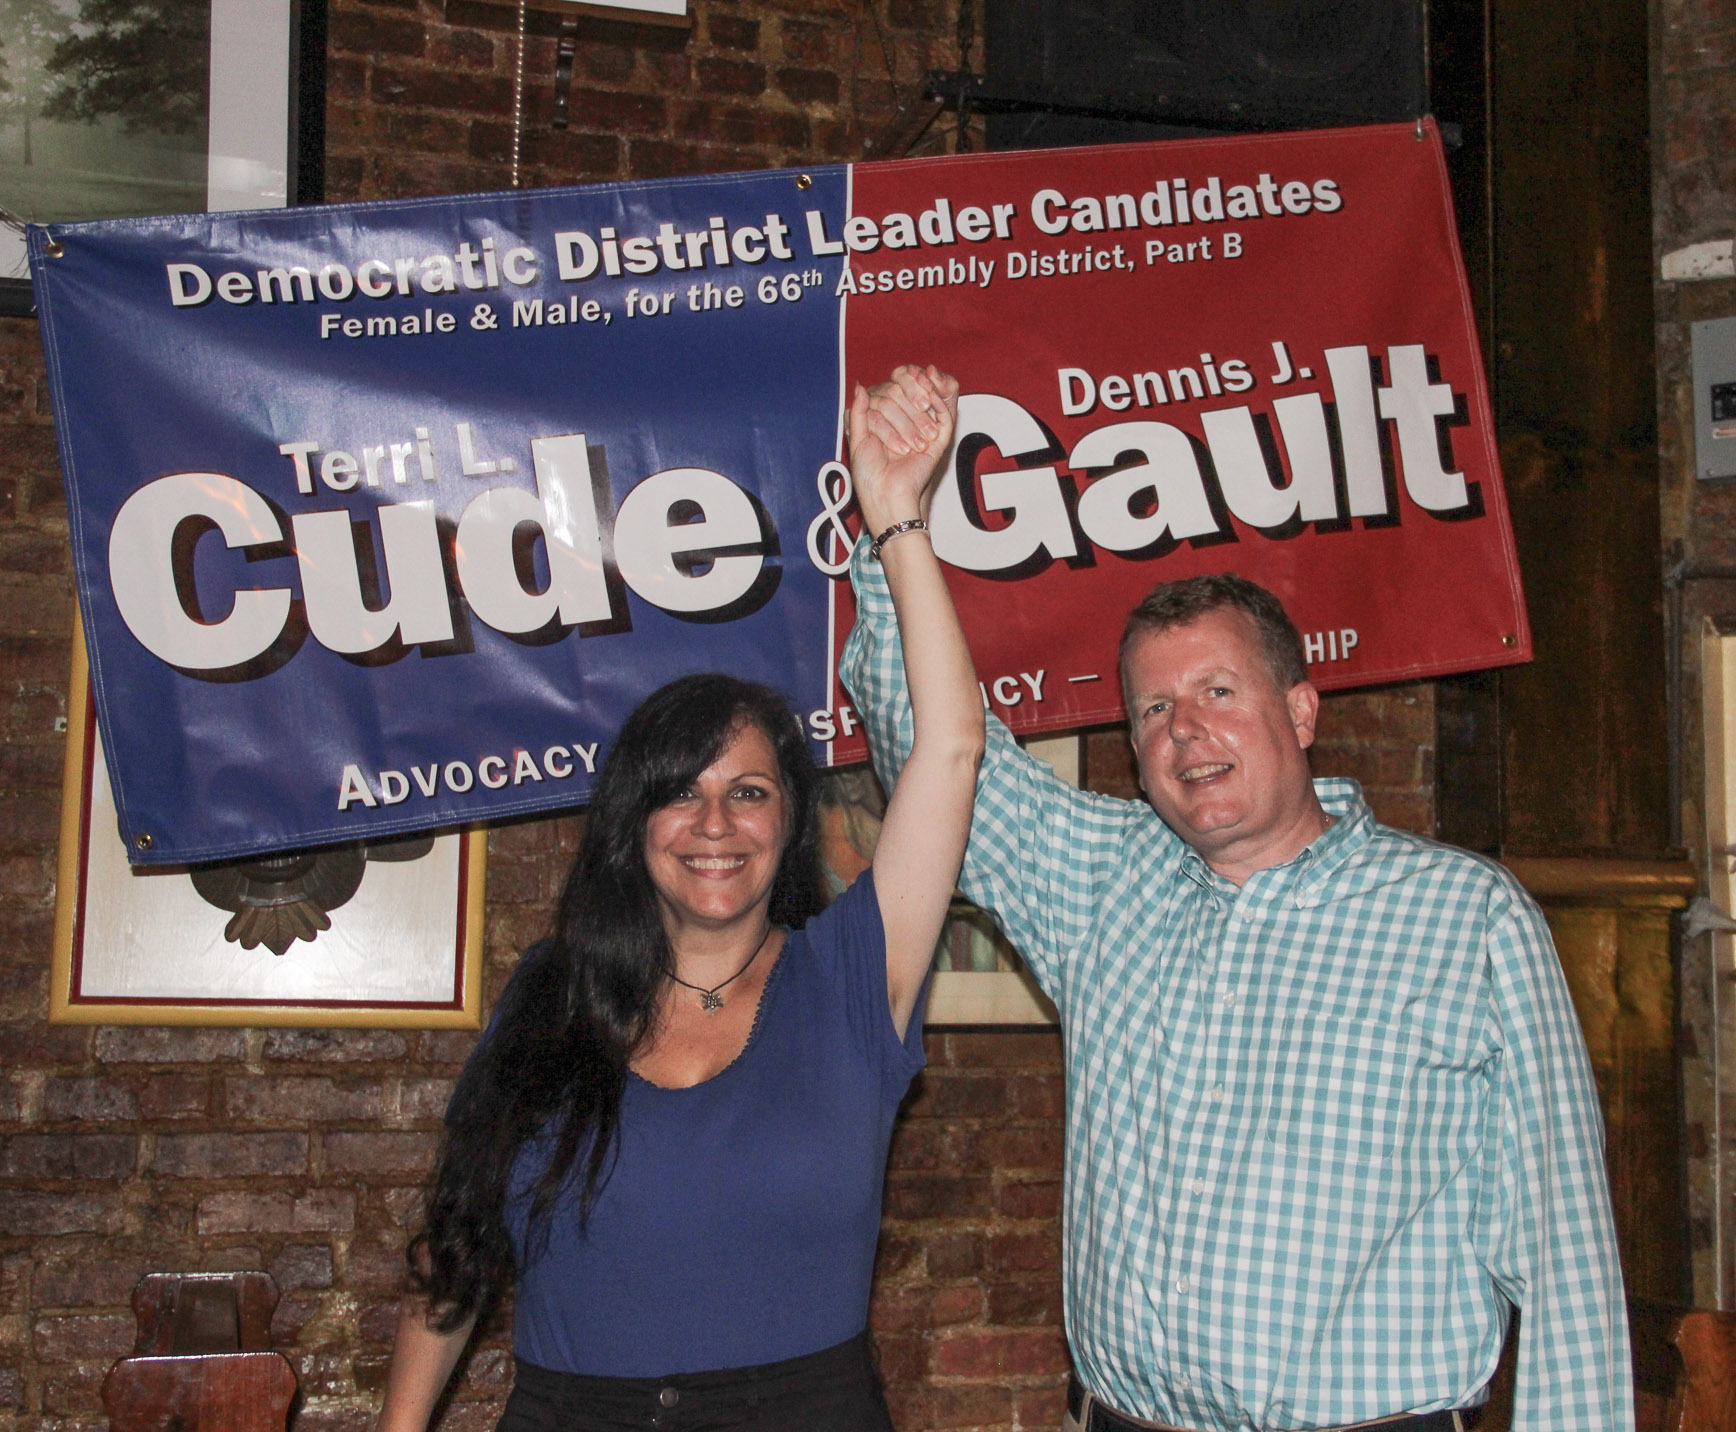 Chalk up another win! Terri Cude, left, celebrating with Dennis Gault in September 2015 after the running mates won election as female and male Democratic district leaders for the Village. Villager file photo